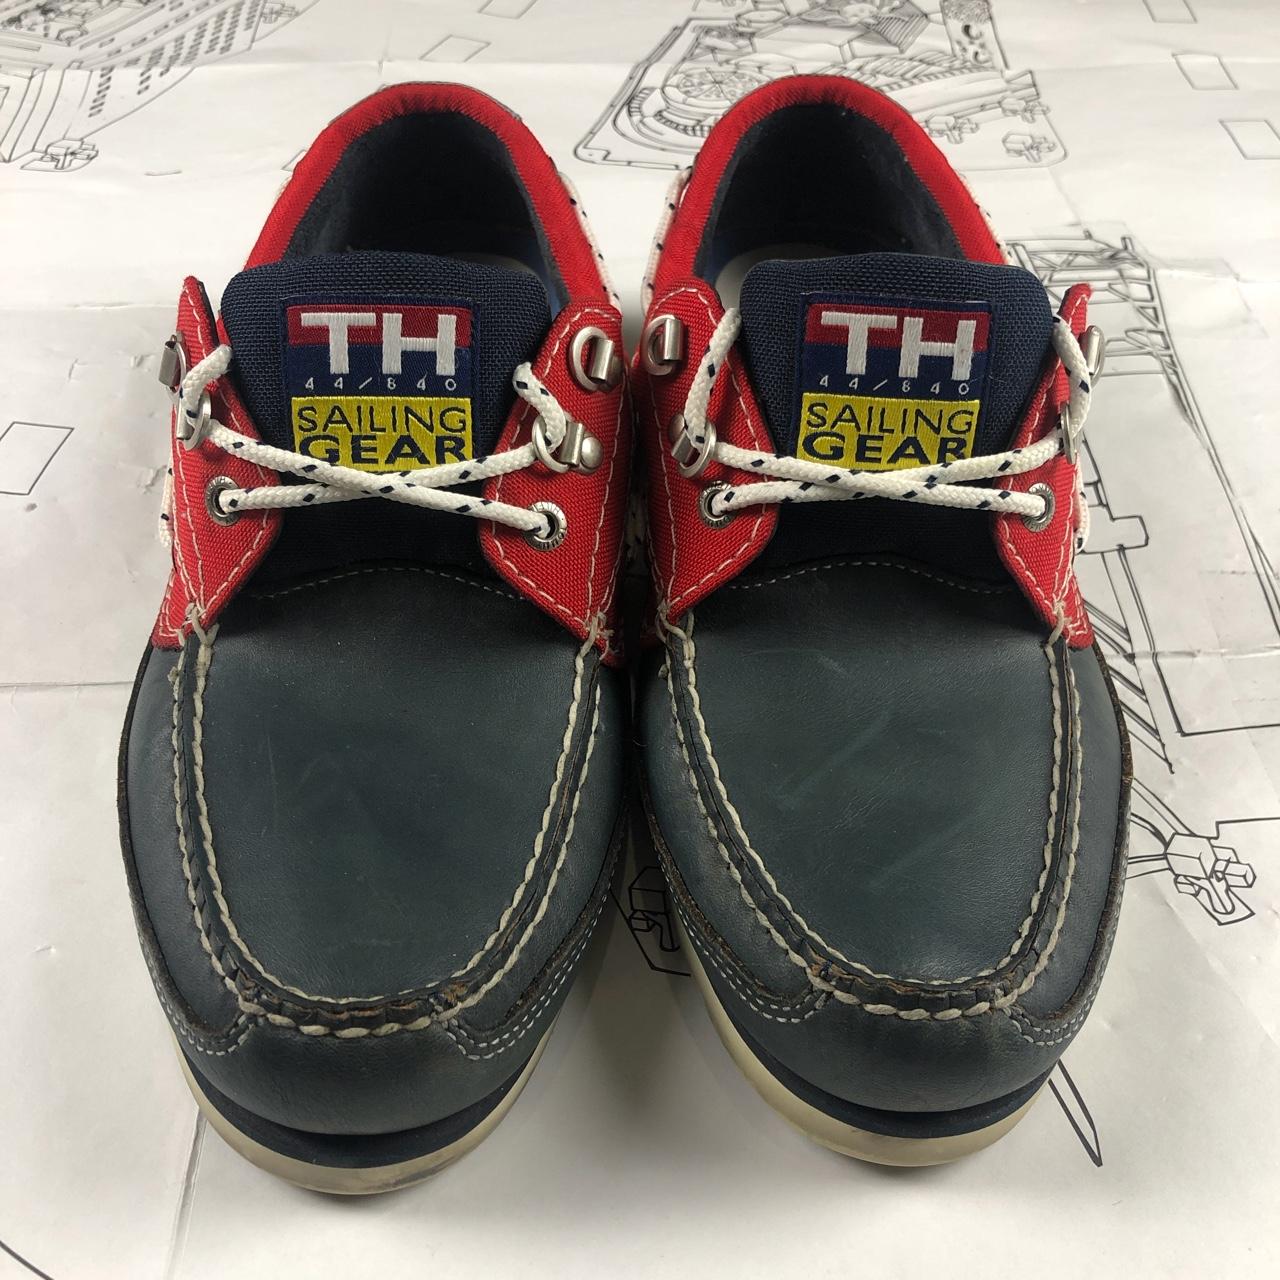 Tommy Hilfiger Men's Navy and Red Boat-shoes